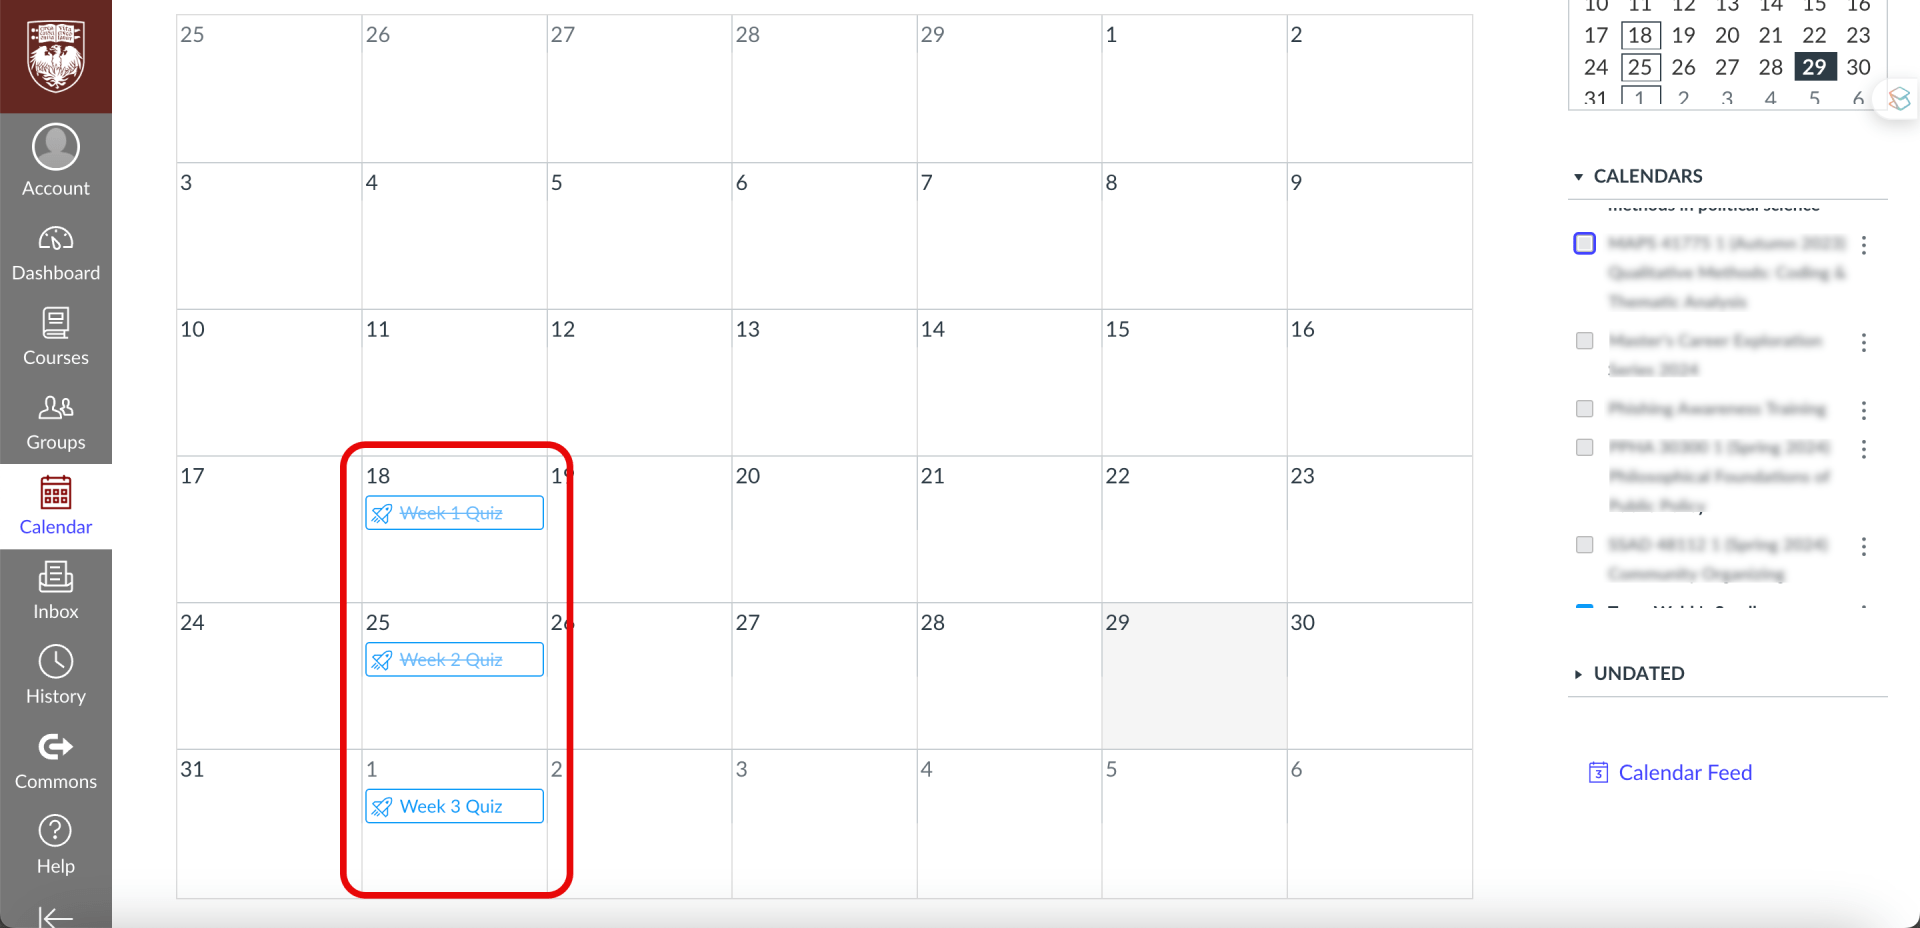 Screen shows a canvas calendar with due dates for quizzes listed. 